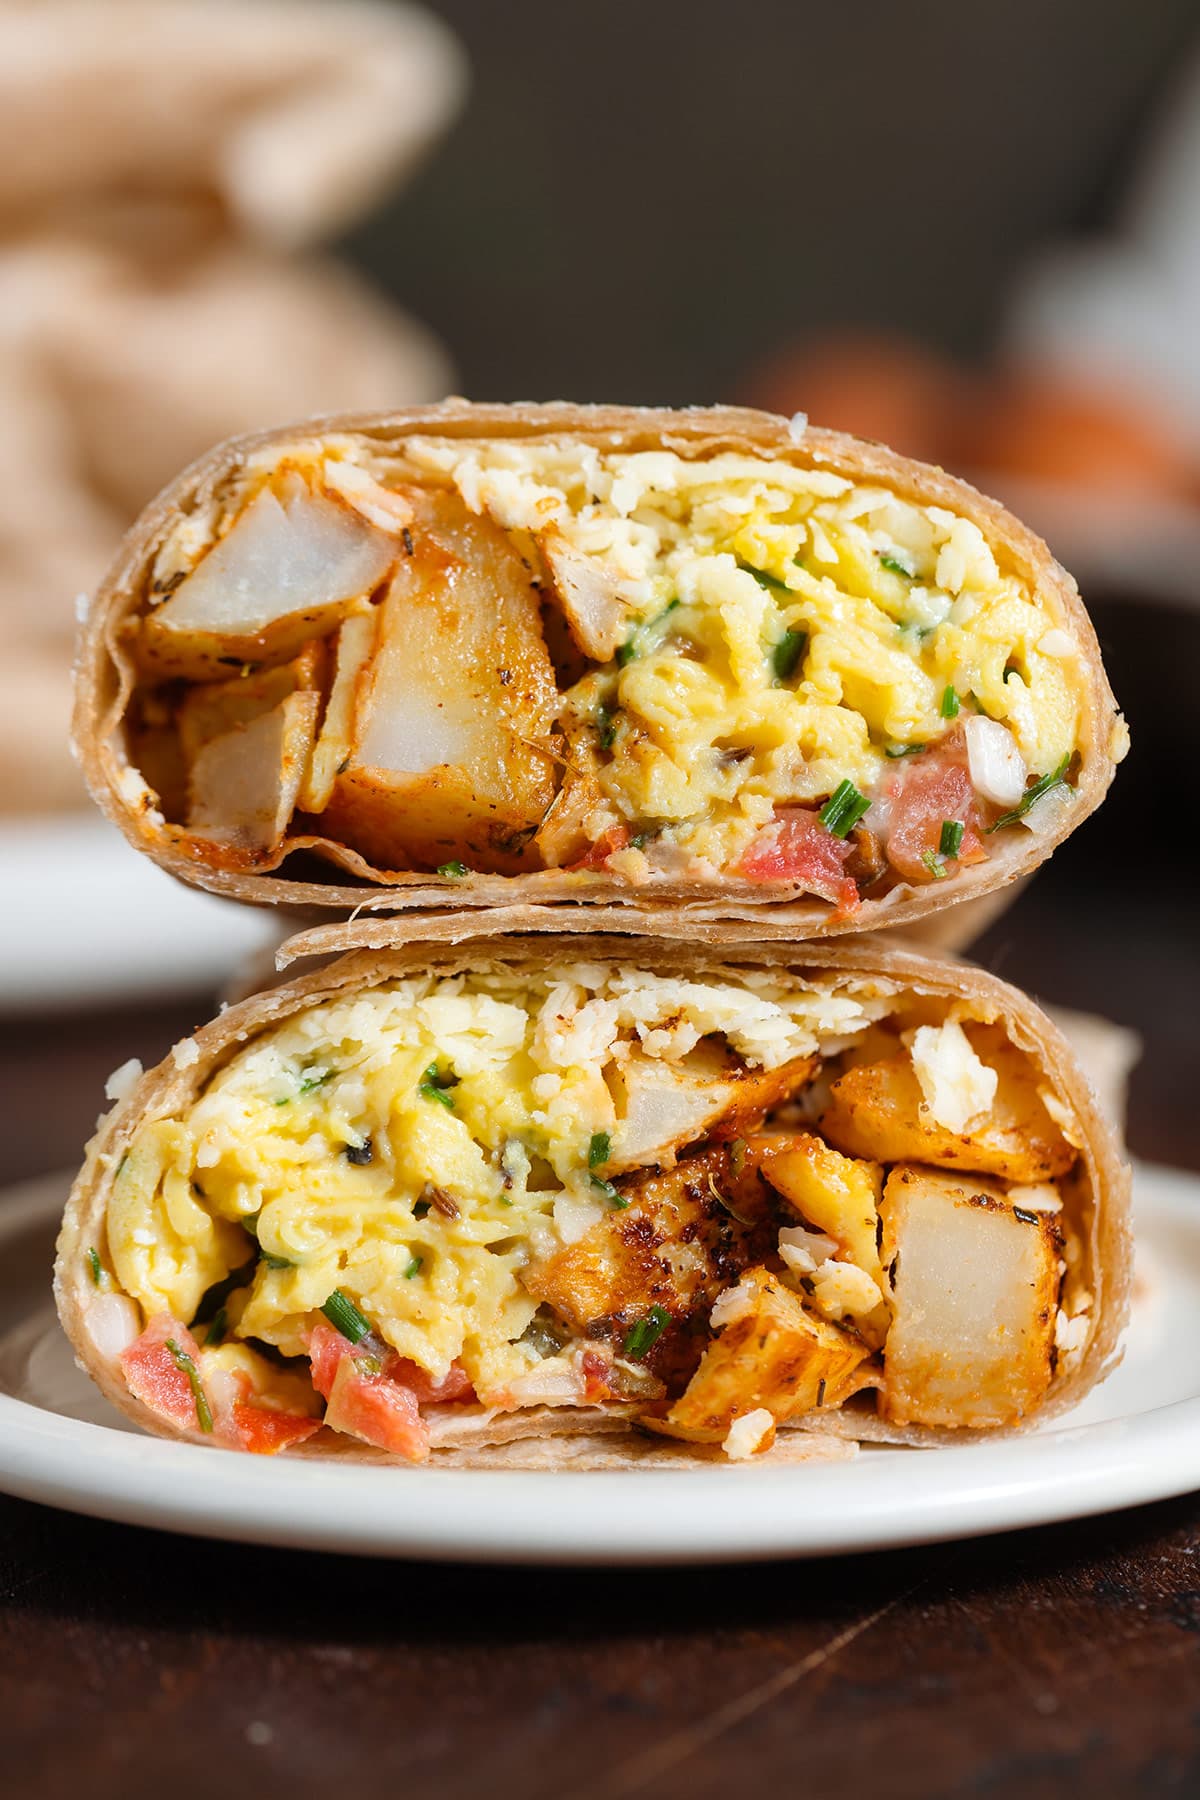 A breakfast burrito cut in half on a small white plate on a wooden background with more burritos and eggs in the background.